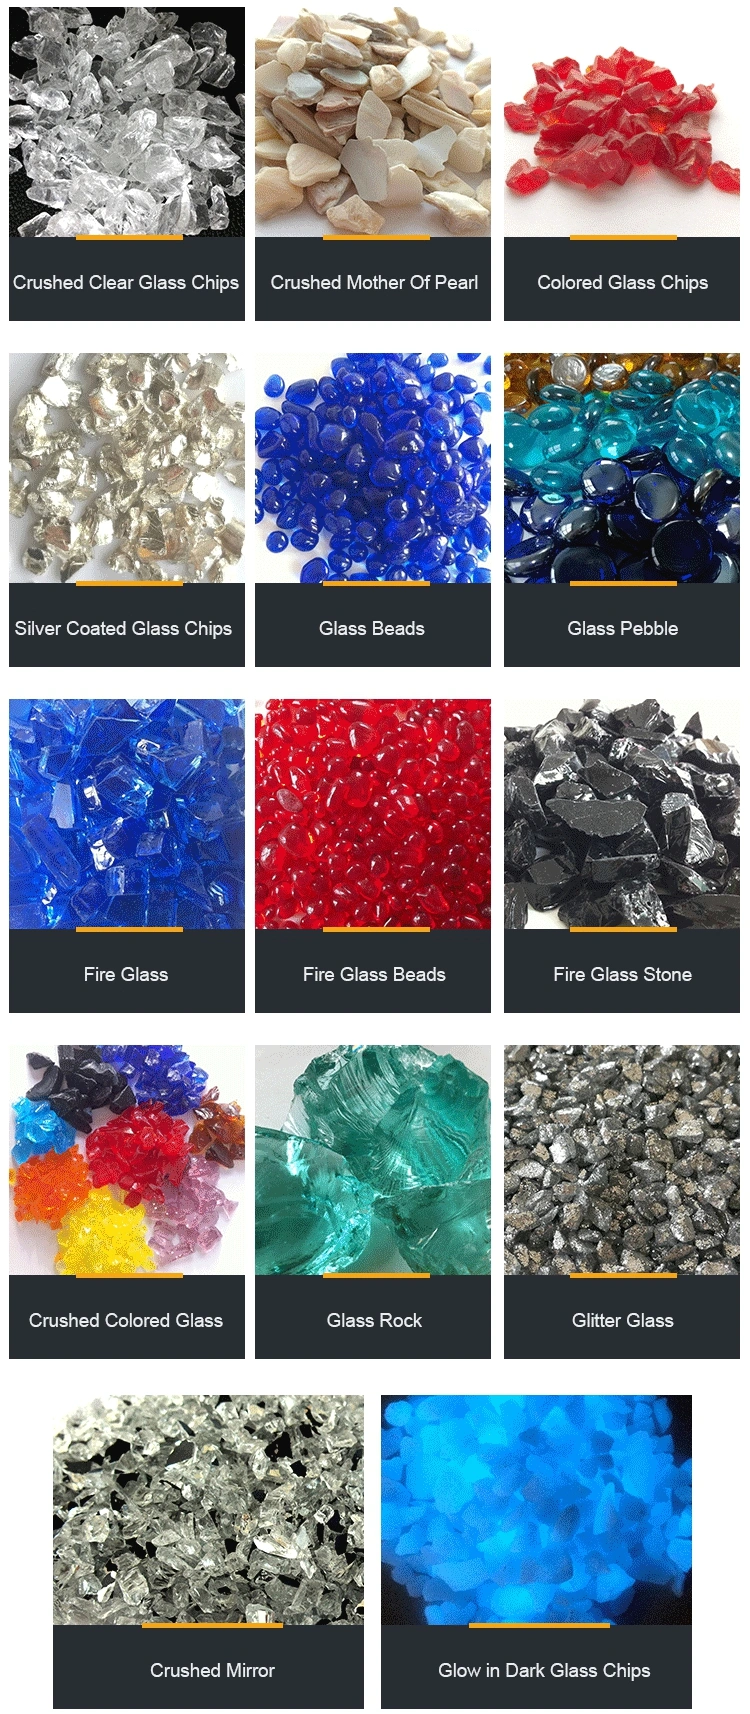 Opaque Colorful Decorative Glass Chips Recycled Crushed Glass for Crafts